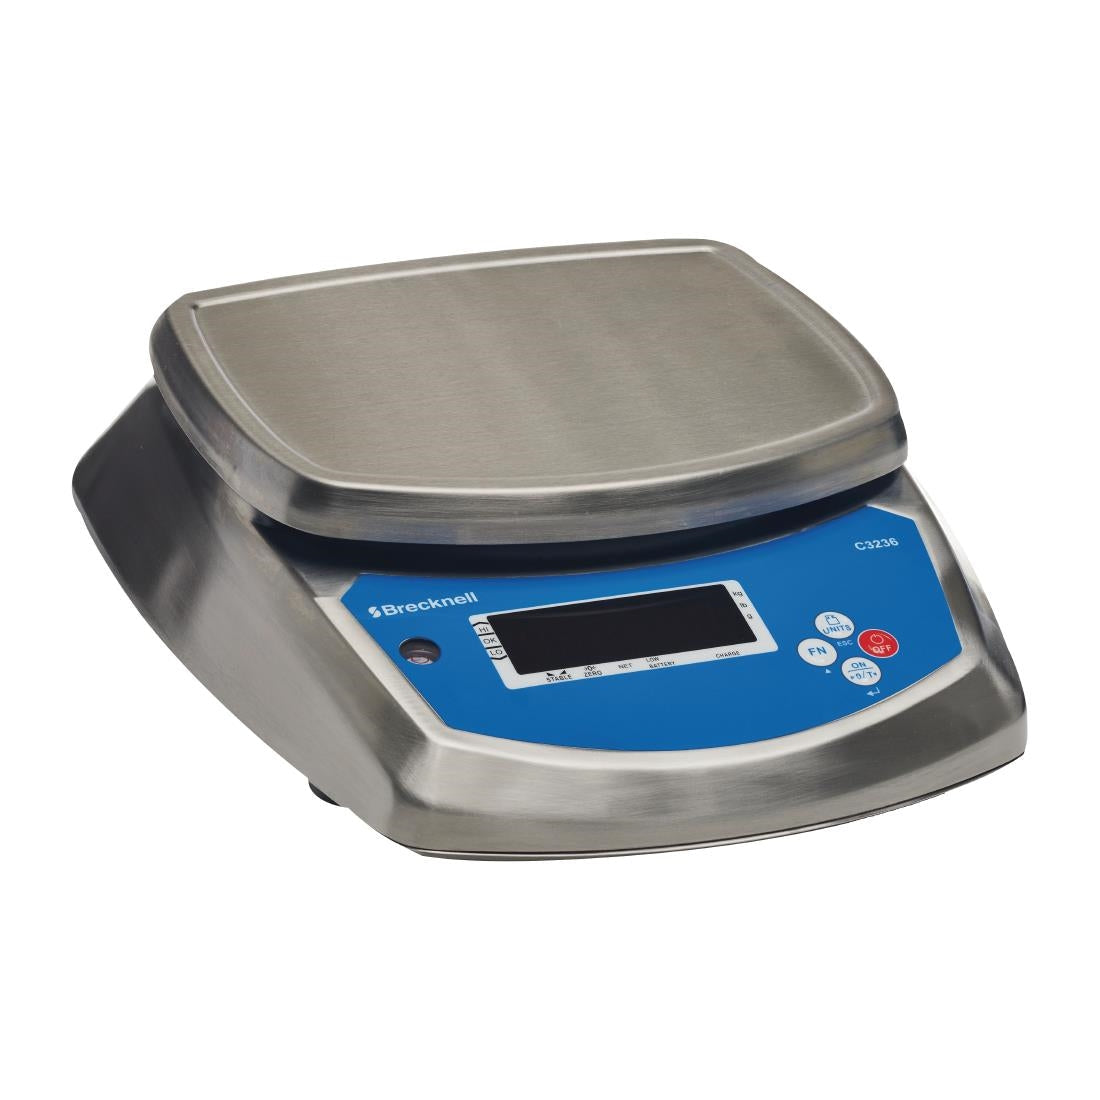 CH079 Brecknell Check Weigher Scales 15kg JD Catering Equipment Solutions Ltd